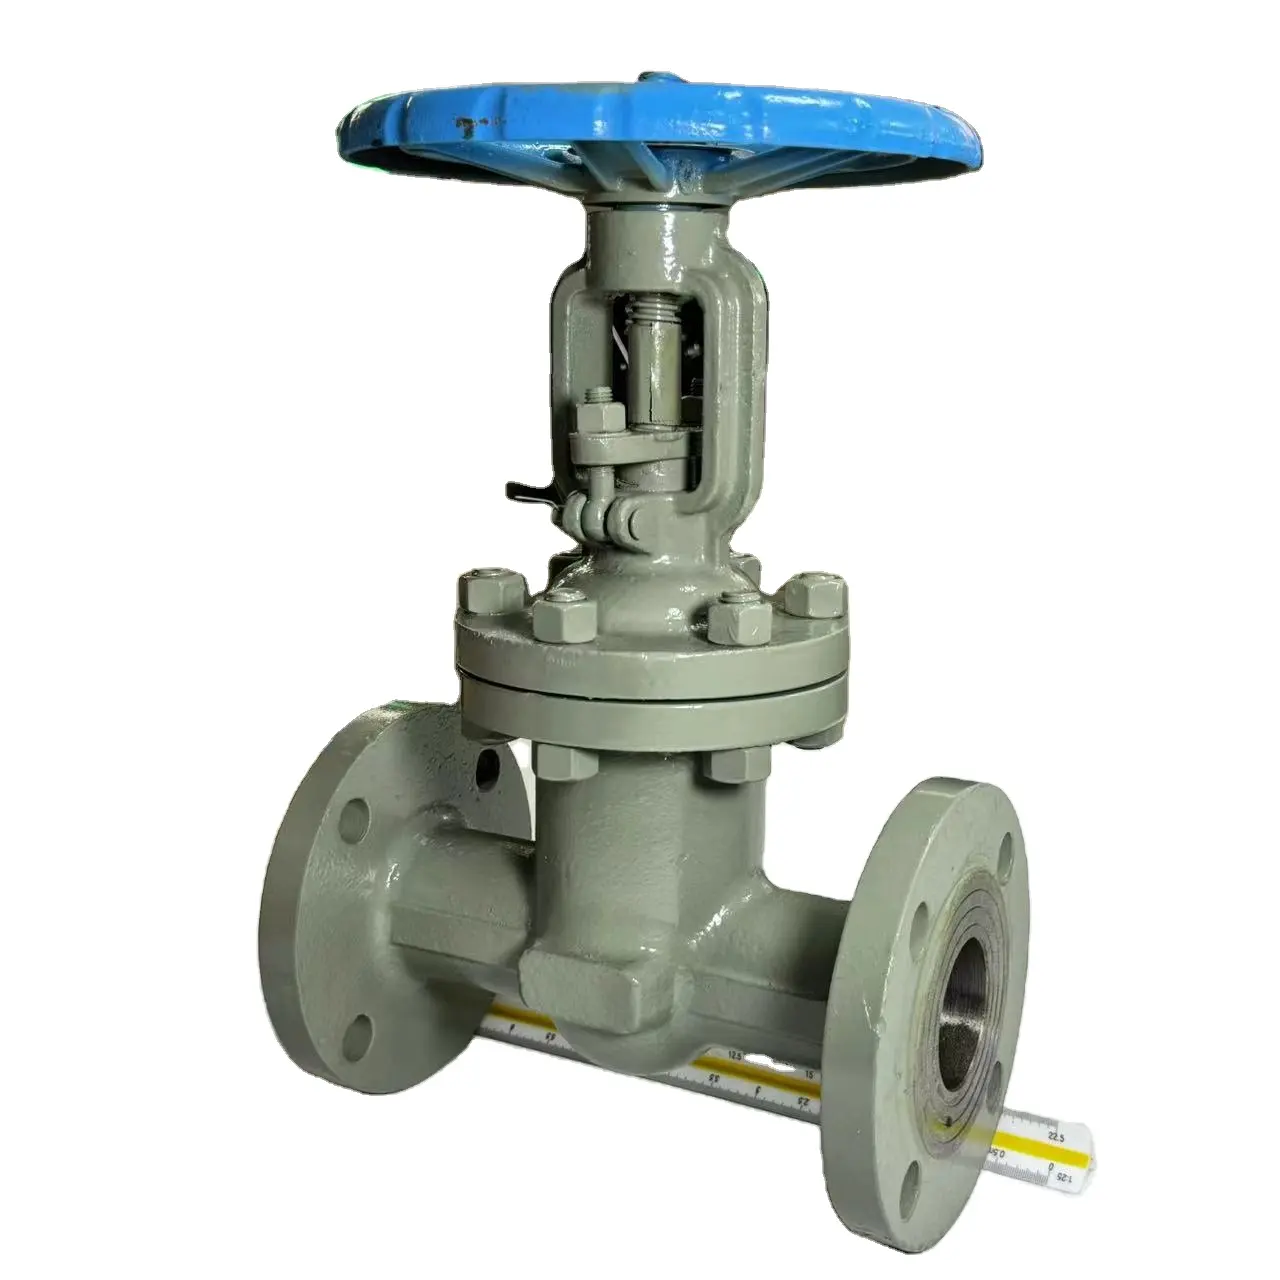 GOST Russian Steel OS Y Slide Wedge Flange Gate Valve Carbon Steel with Price 316 Gate Valve